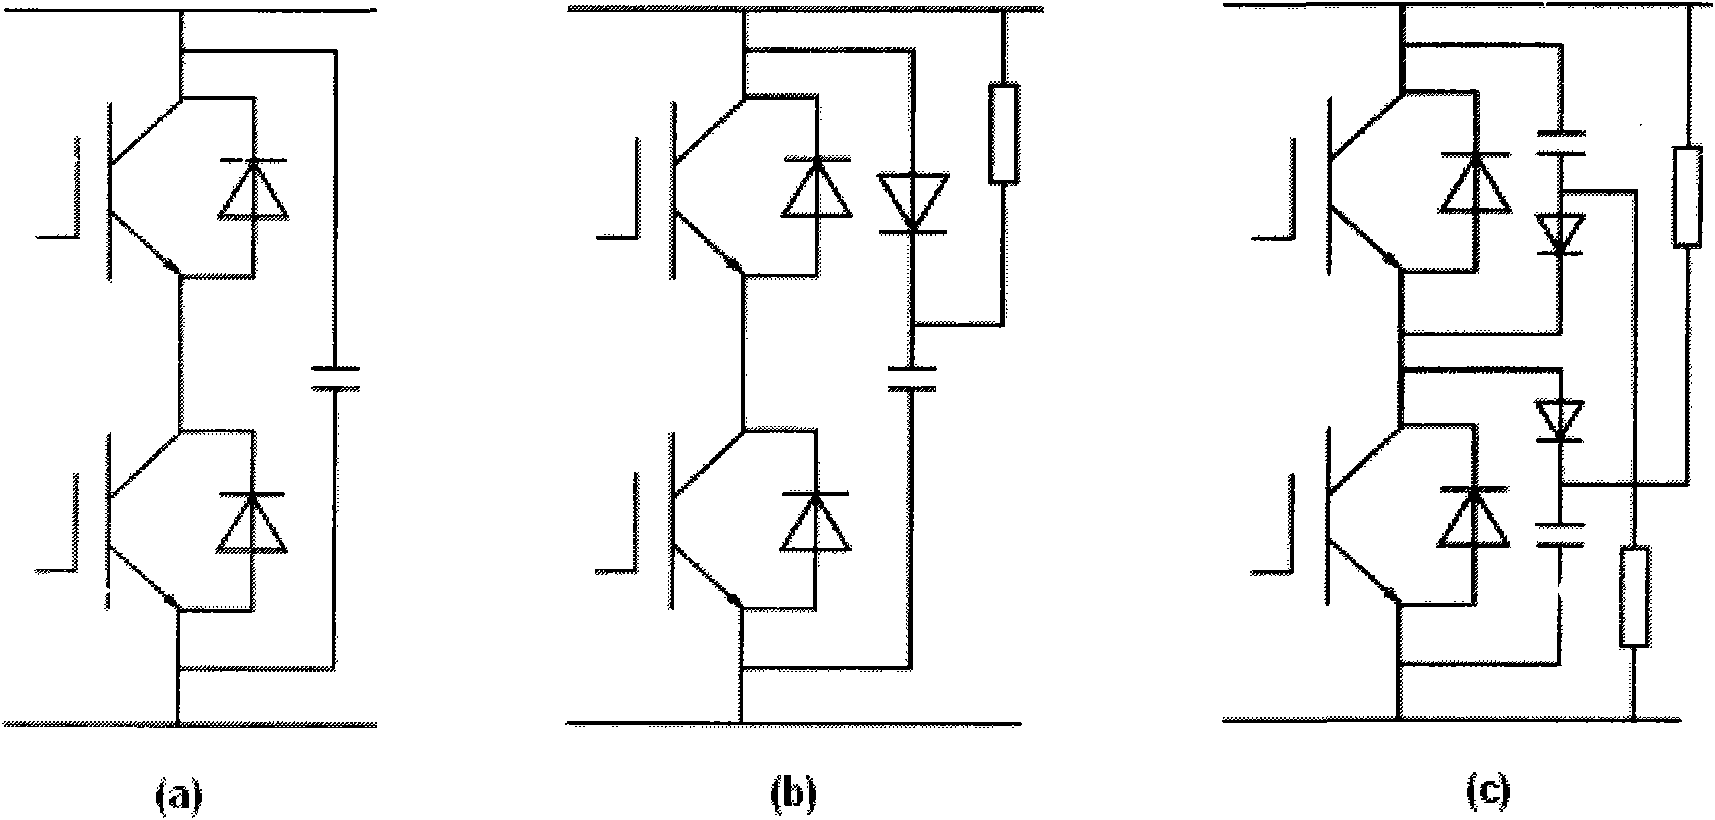 Absorption circuit of high-power electronic device